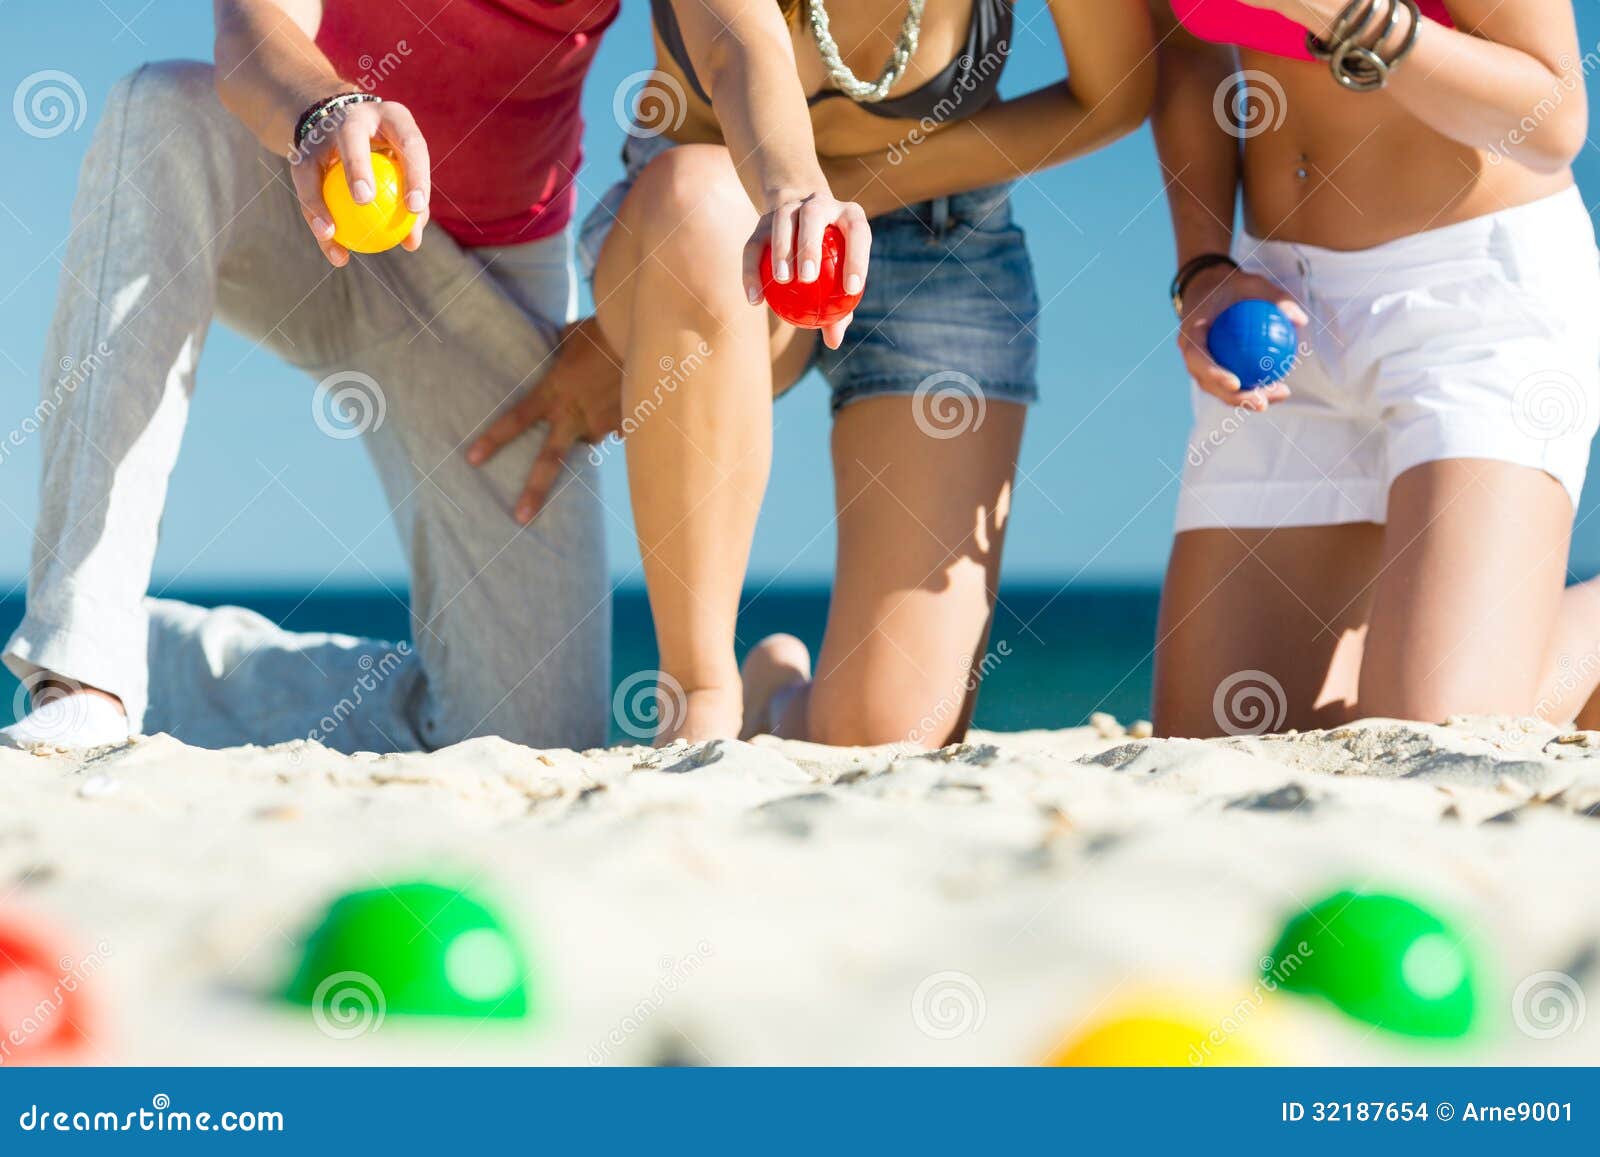 man and women playing boule on beach